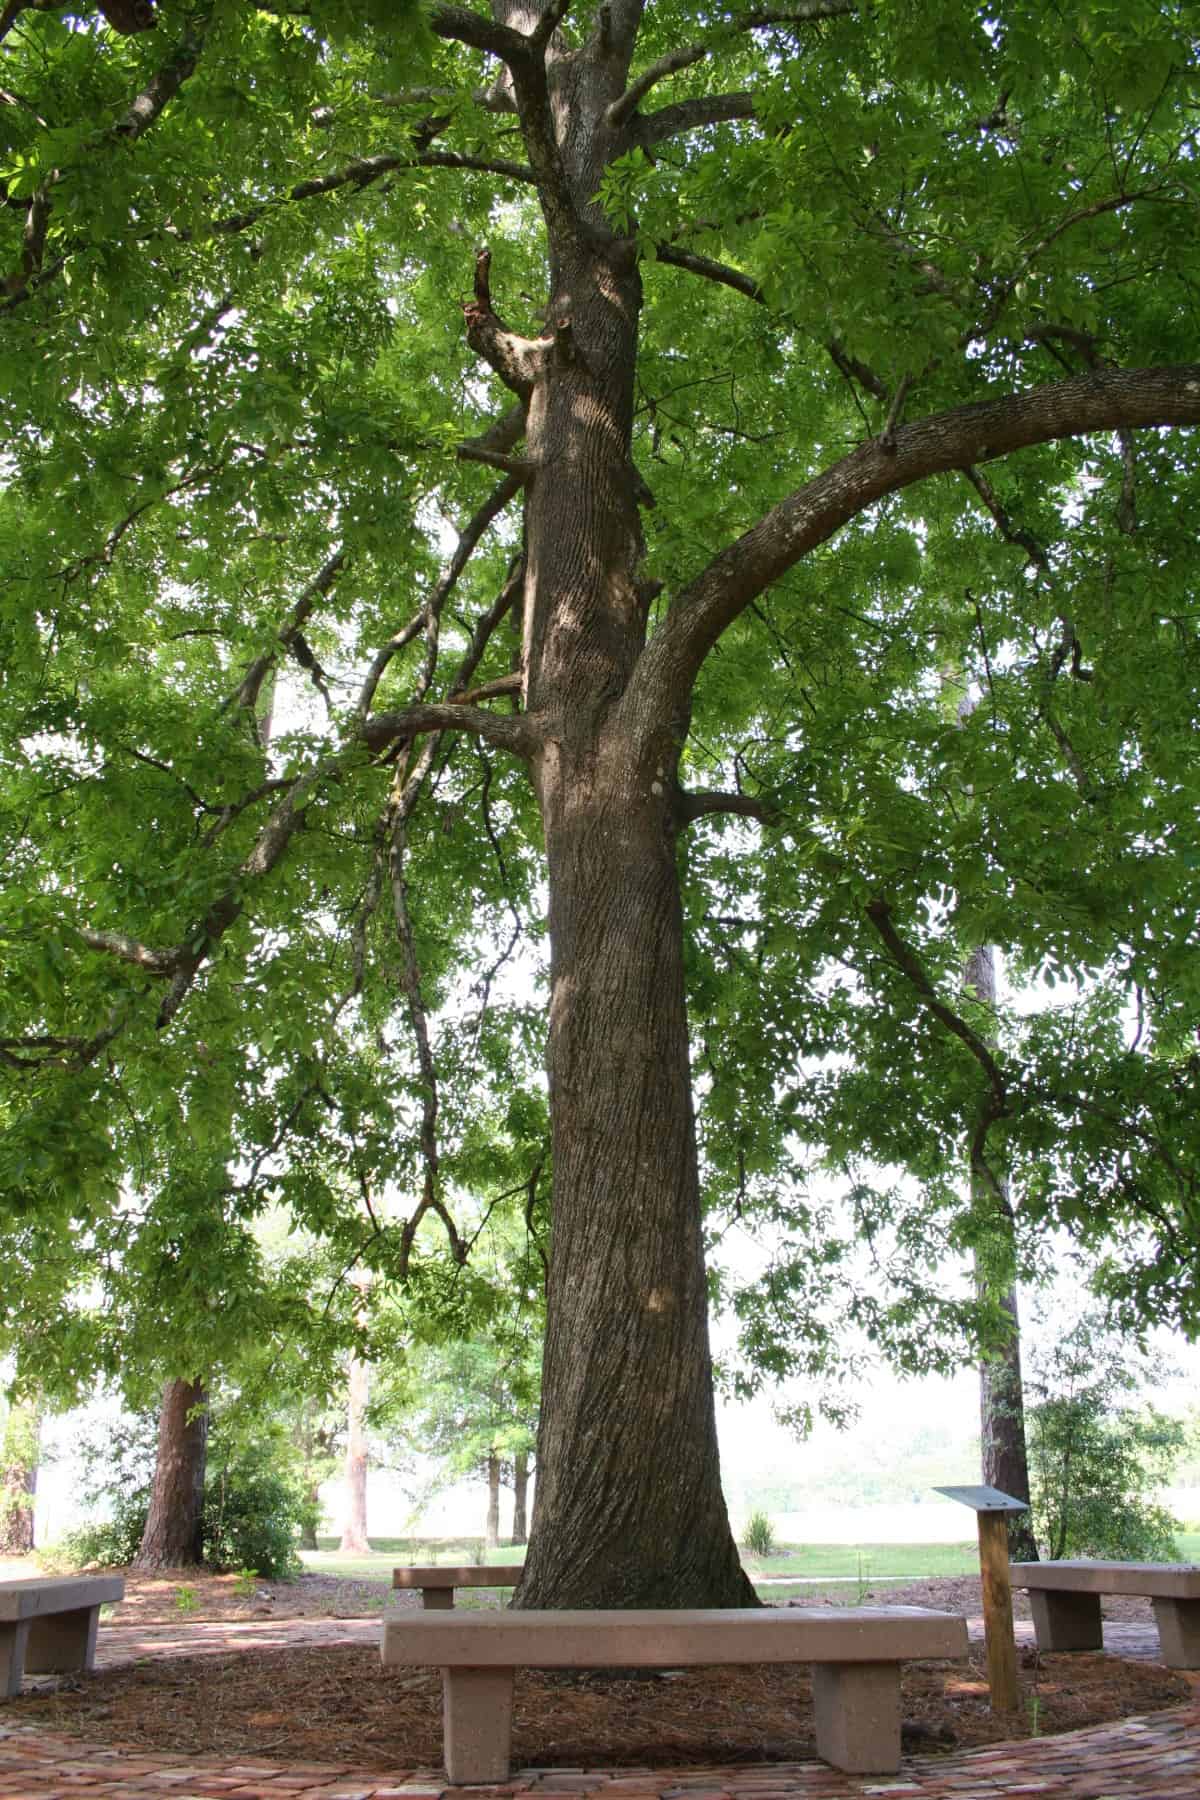 A vertical image of a shellbark hickory tree